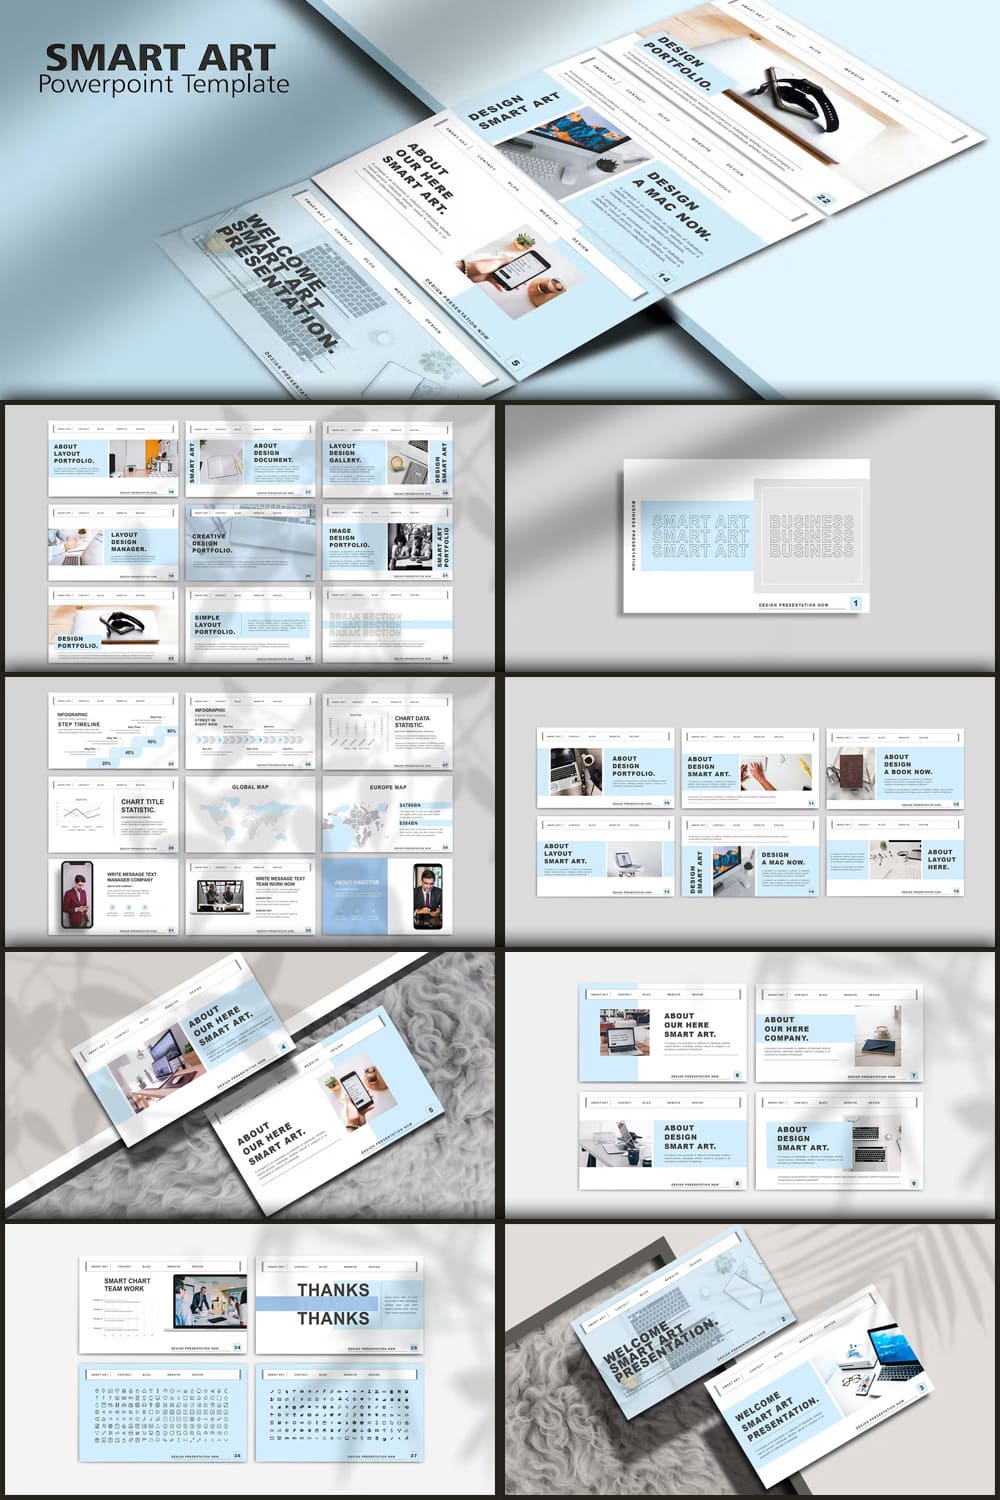 A selection of images of irresistible business presentation template slides.